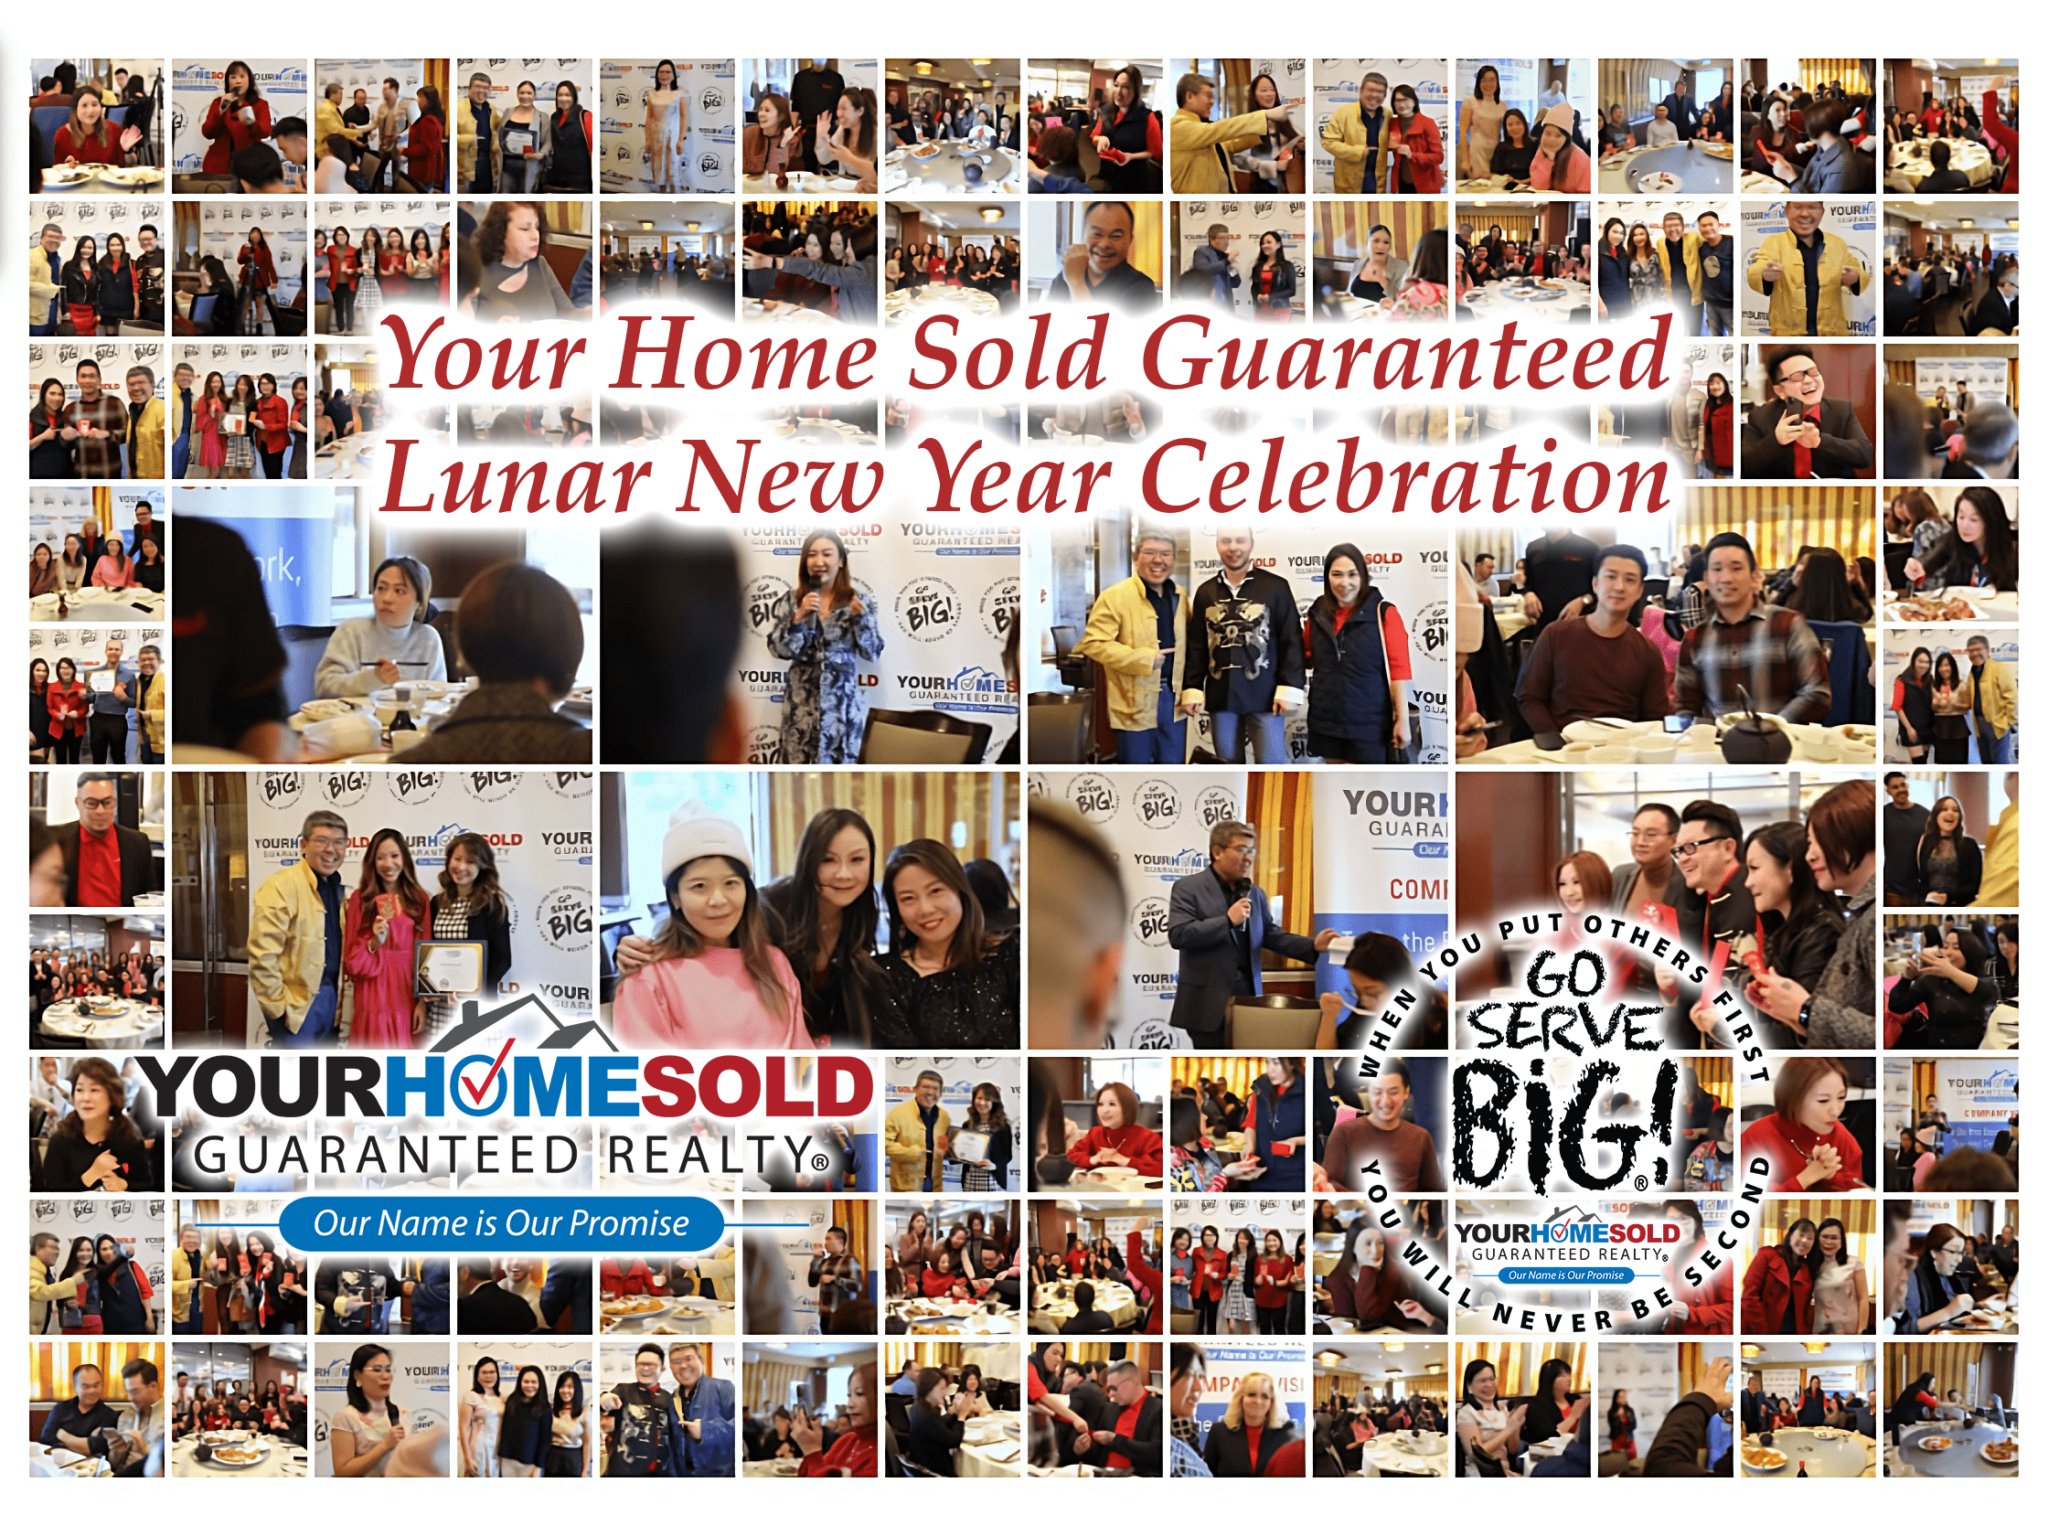 Your-Home-Sold-Guaranteed-Realty-recently-hosted-its-Lunar-Ne-1-2048x1536.png